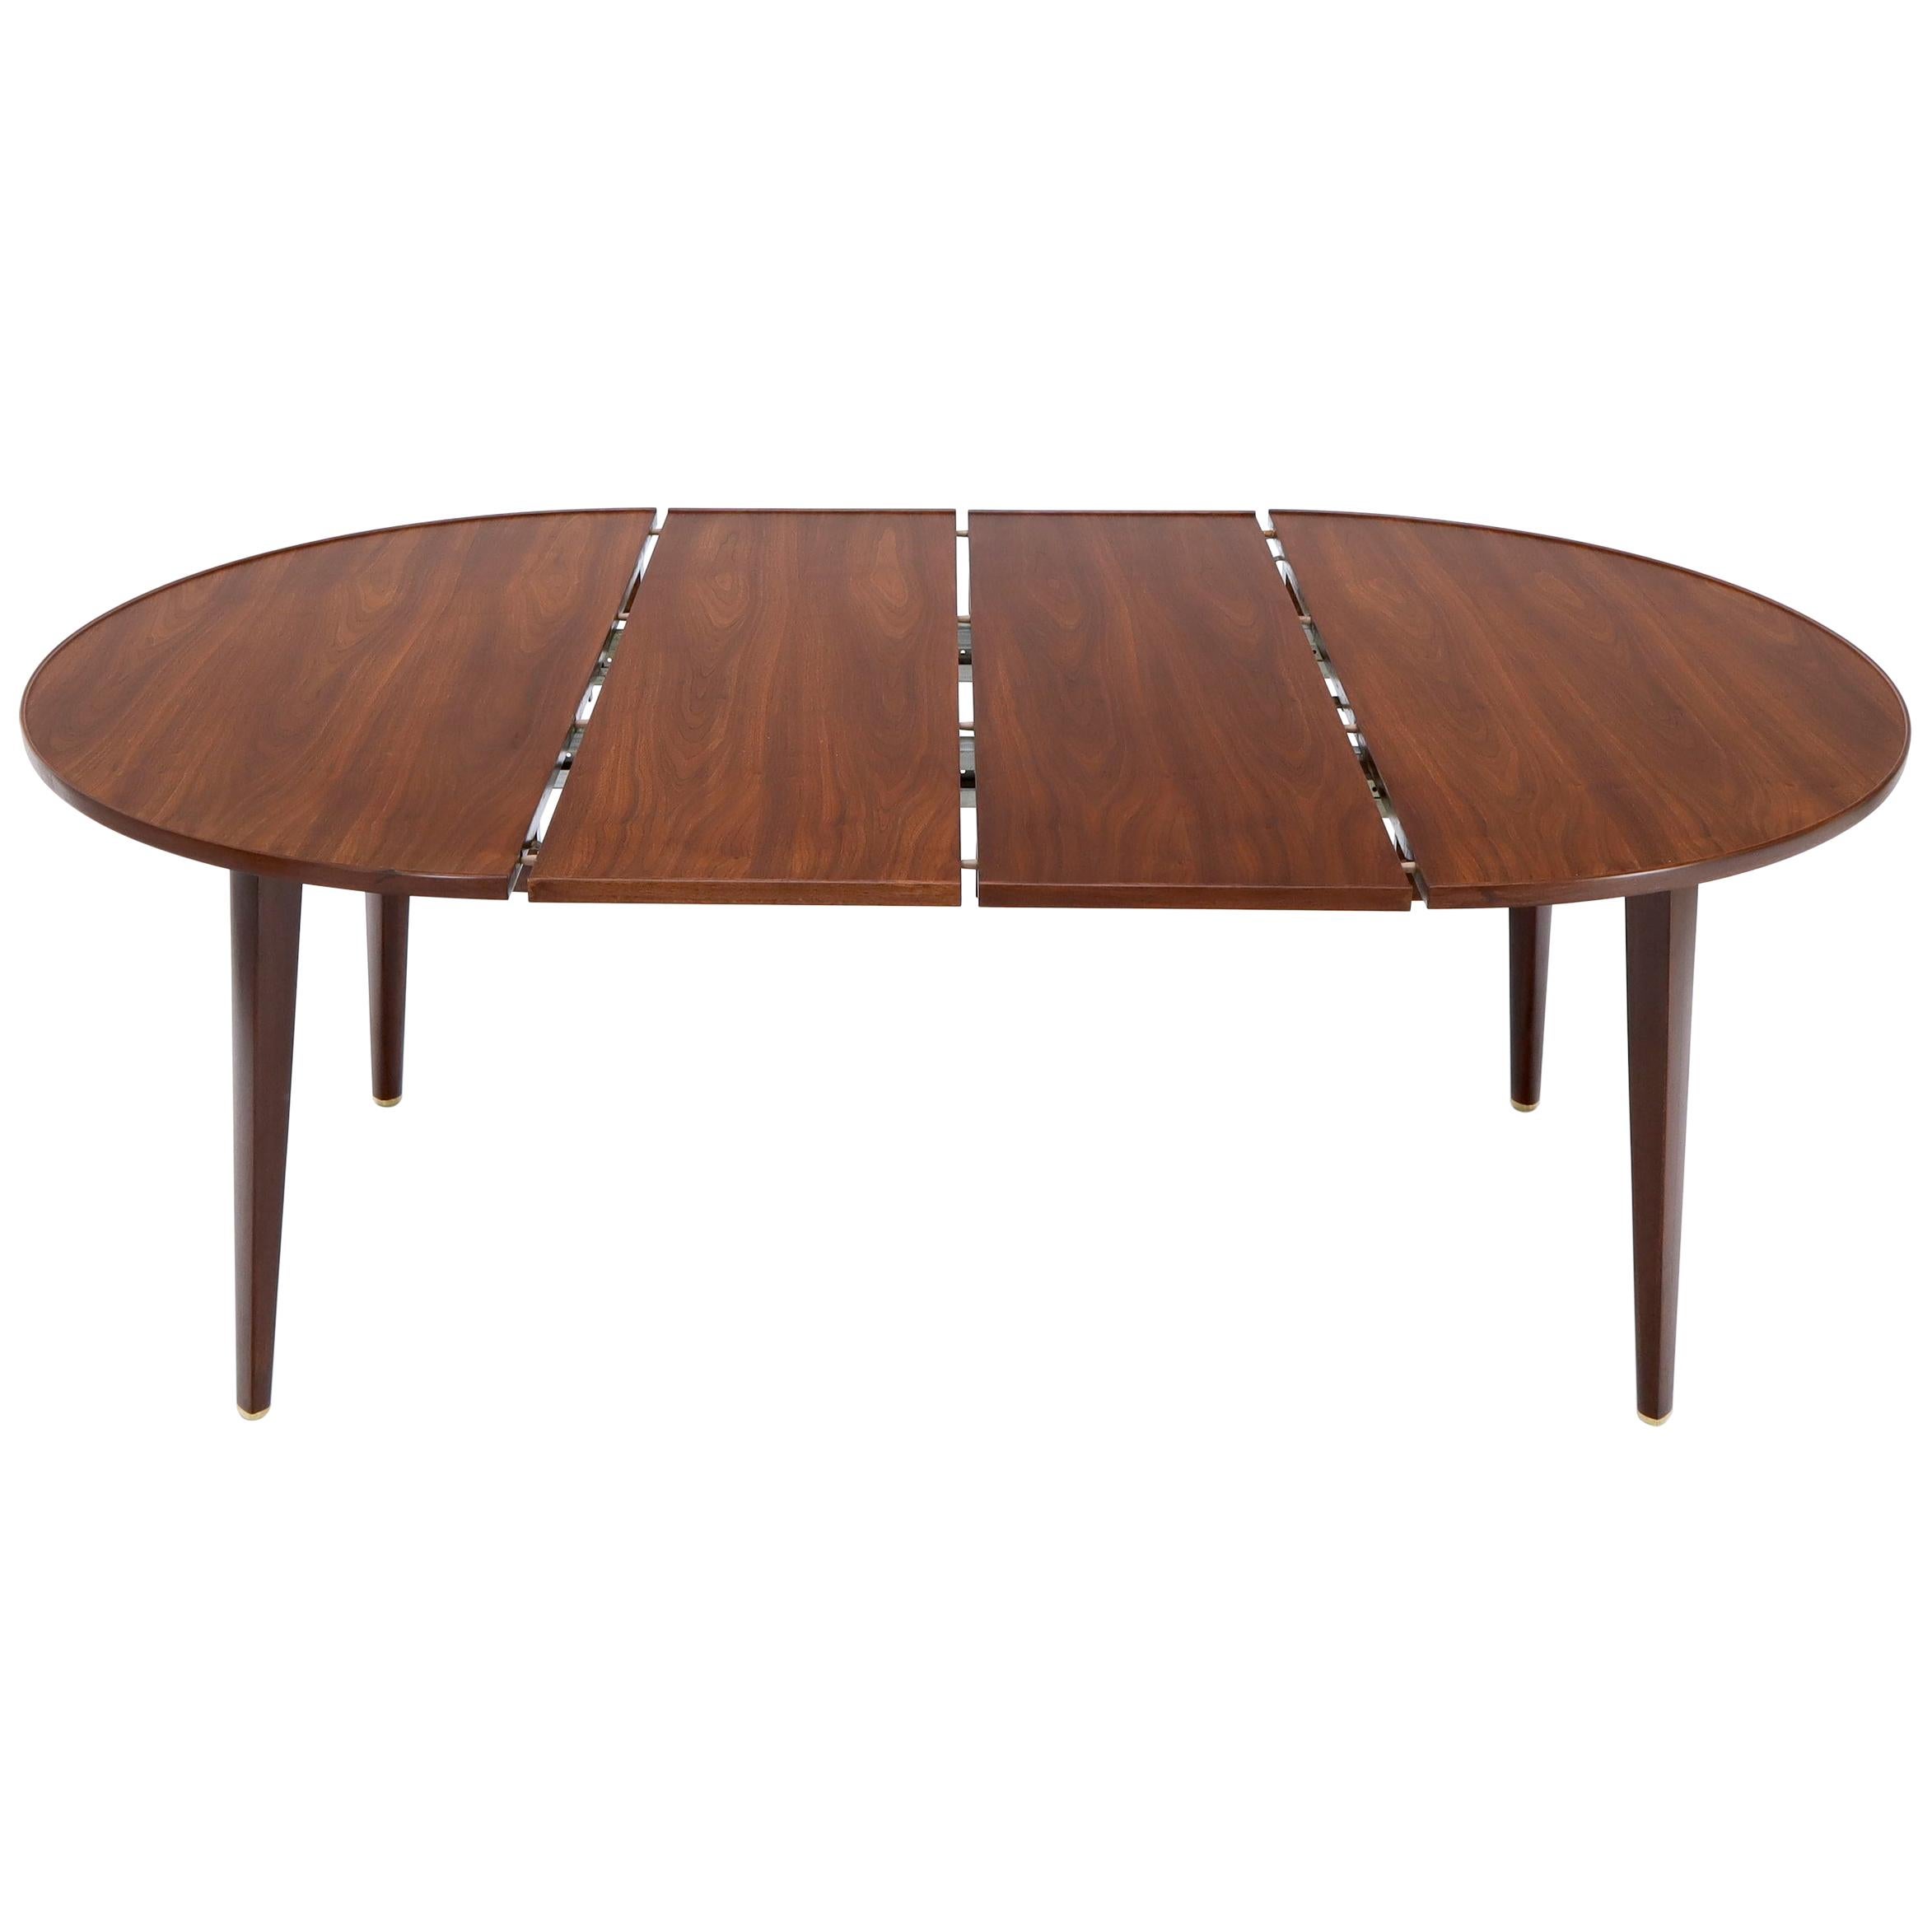 Dunbar Round Walnut Dining Table with 2 Extension Boards Leafs Racetrack Shape